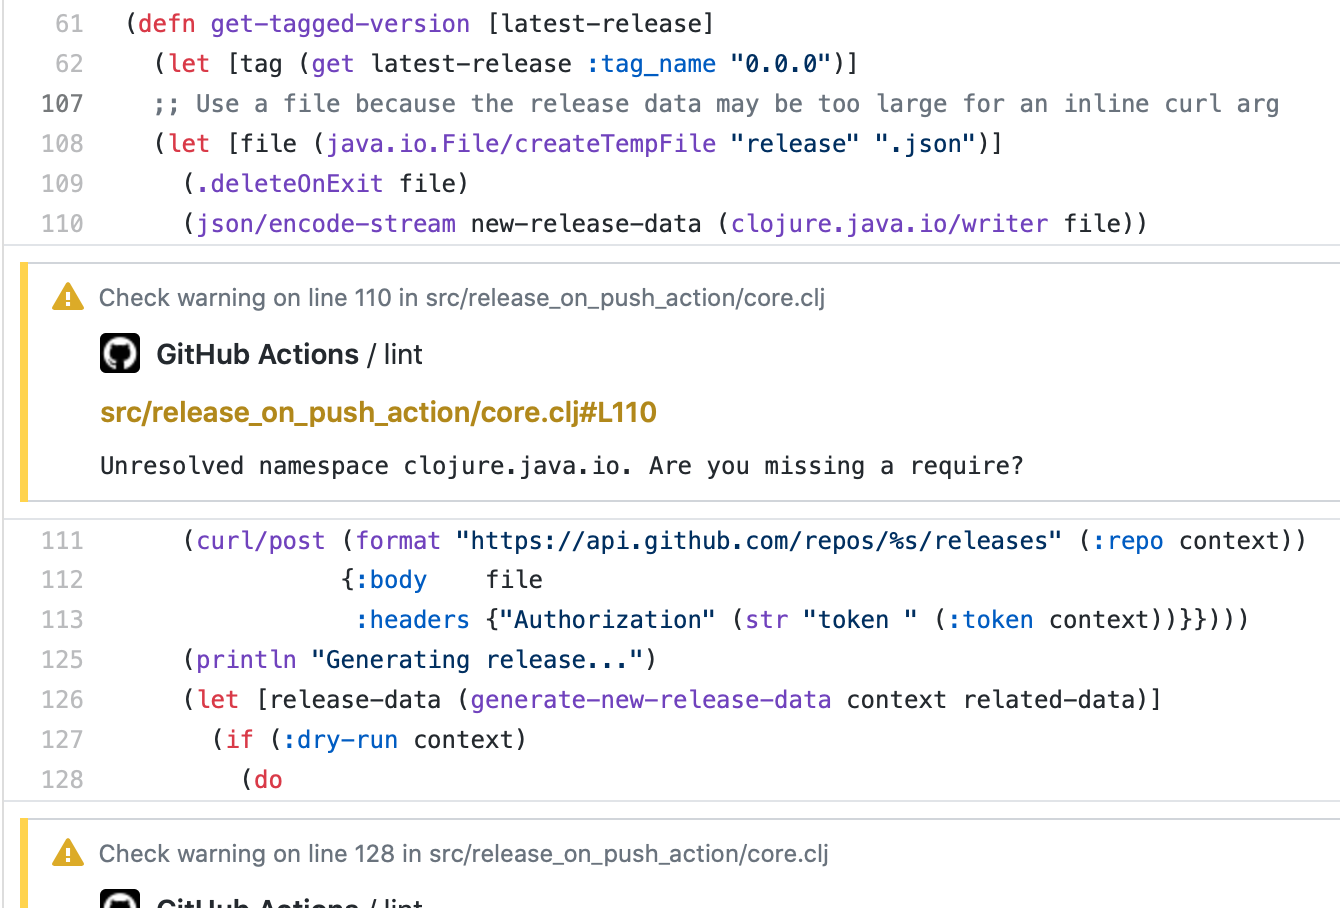 In the Pull Request Files View